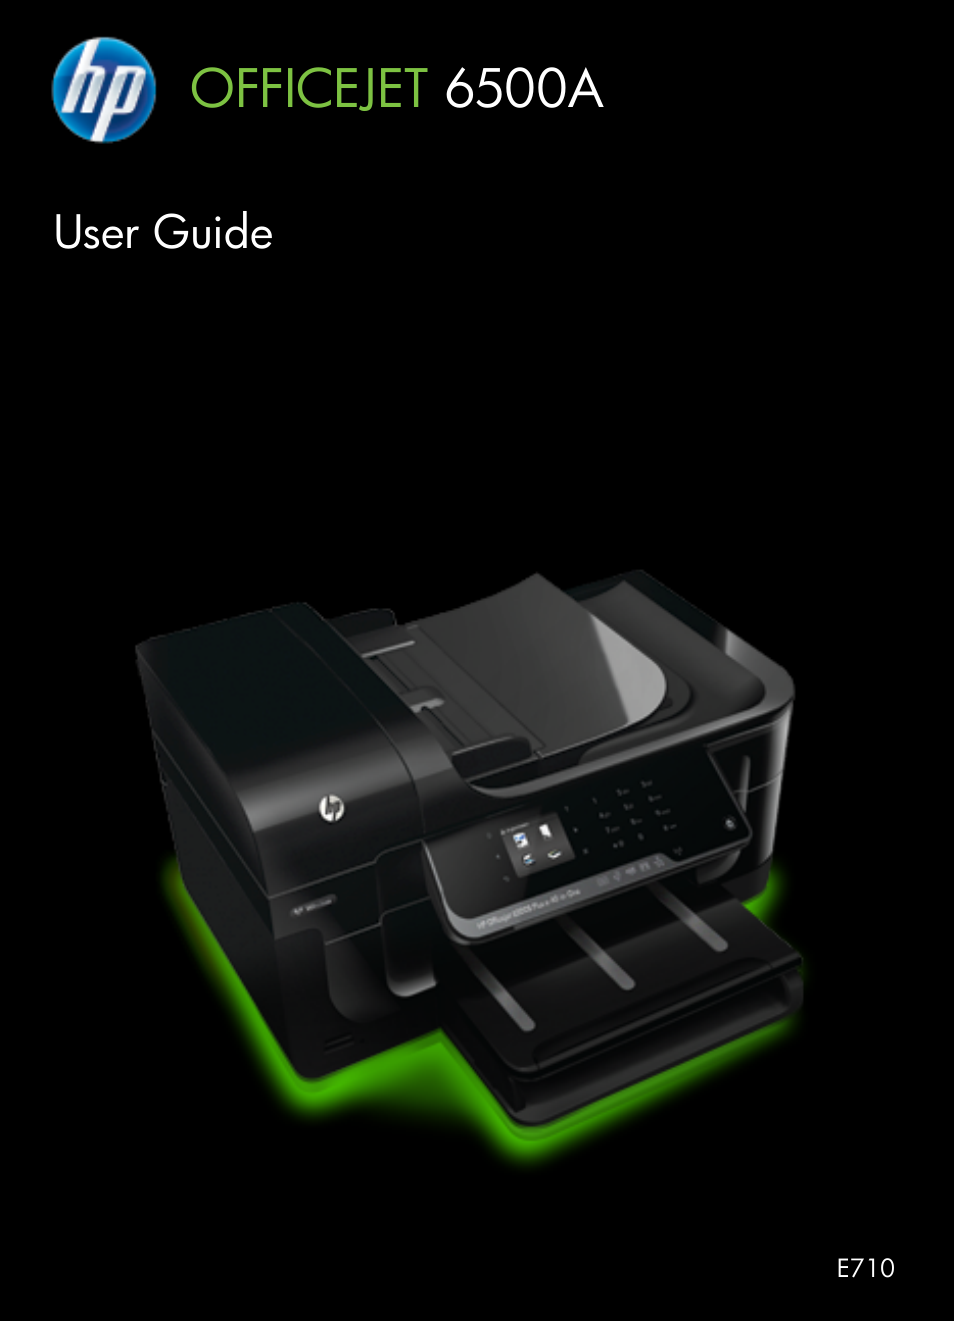 HP Officejet 6500A Plus User Manual | 250 pages | Also for: Officejet 6500A